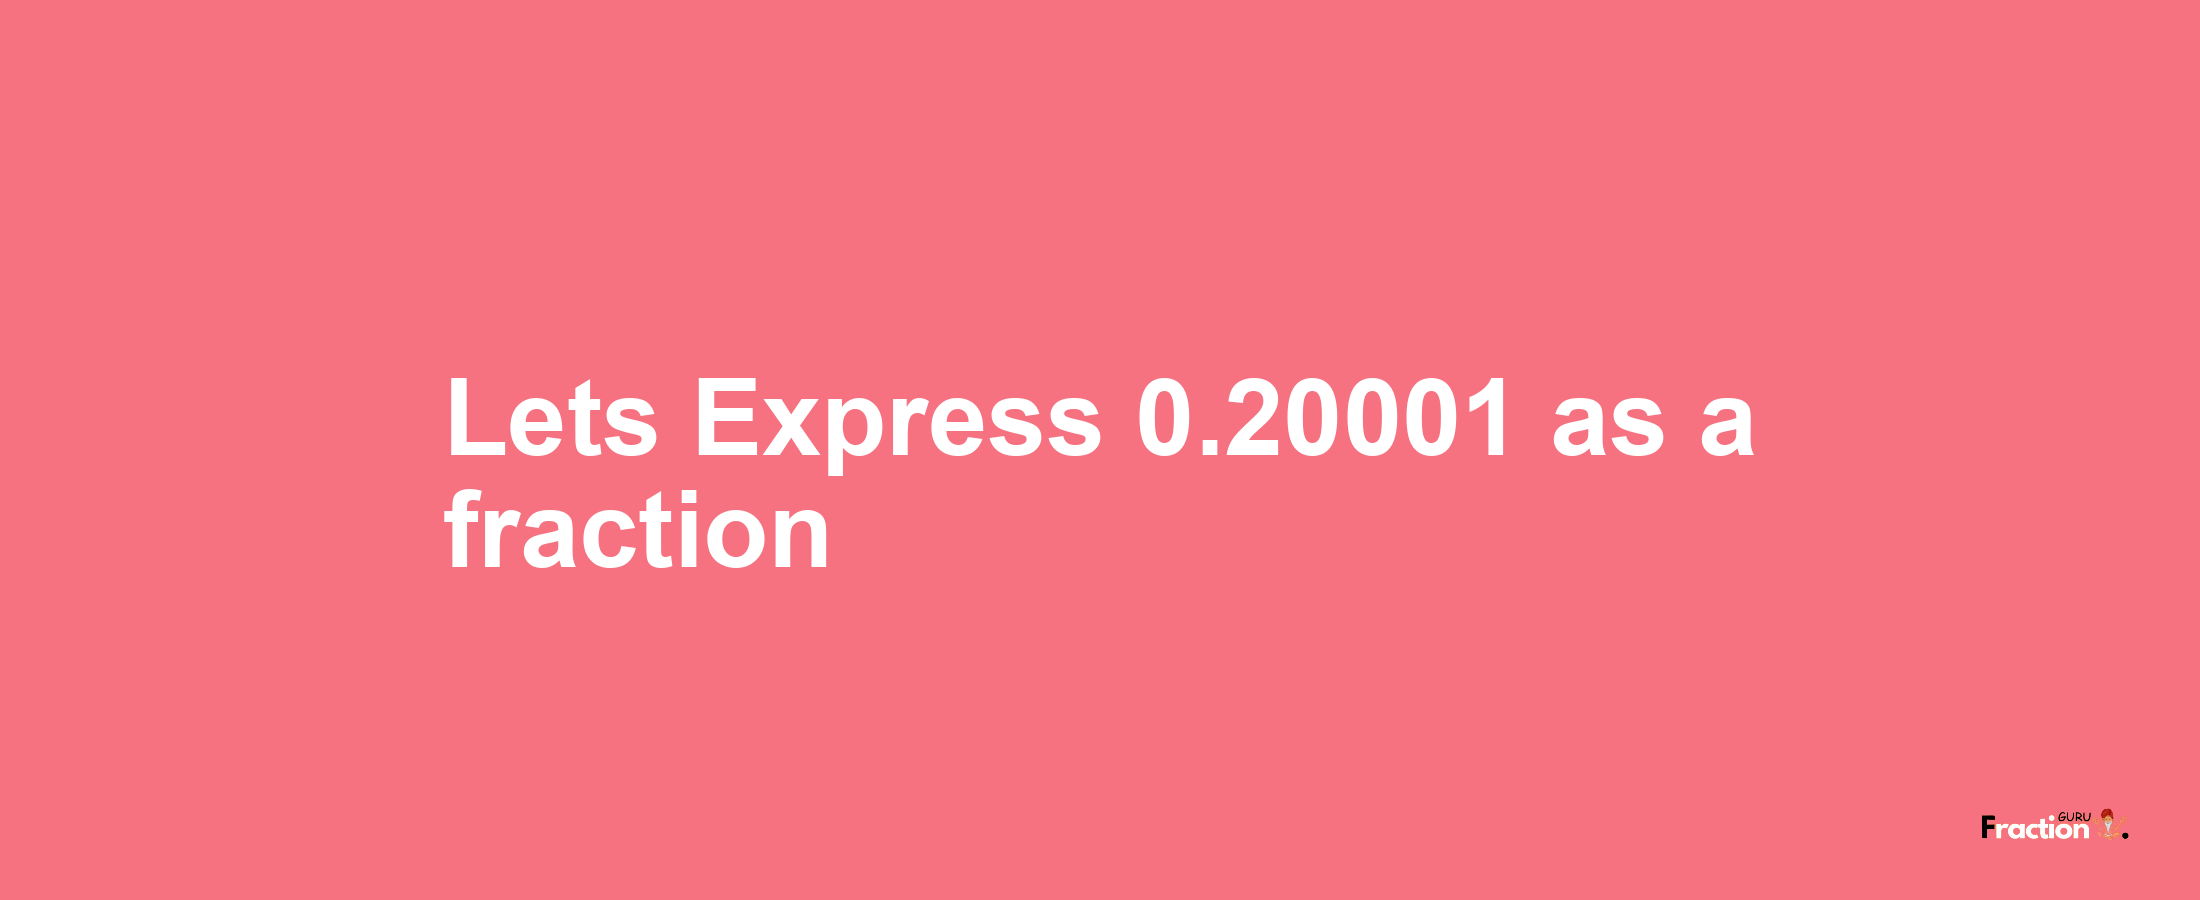 Lets Express 0.20001 as afraction